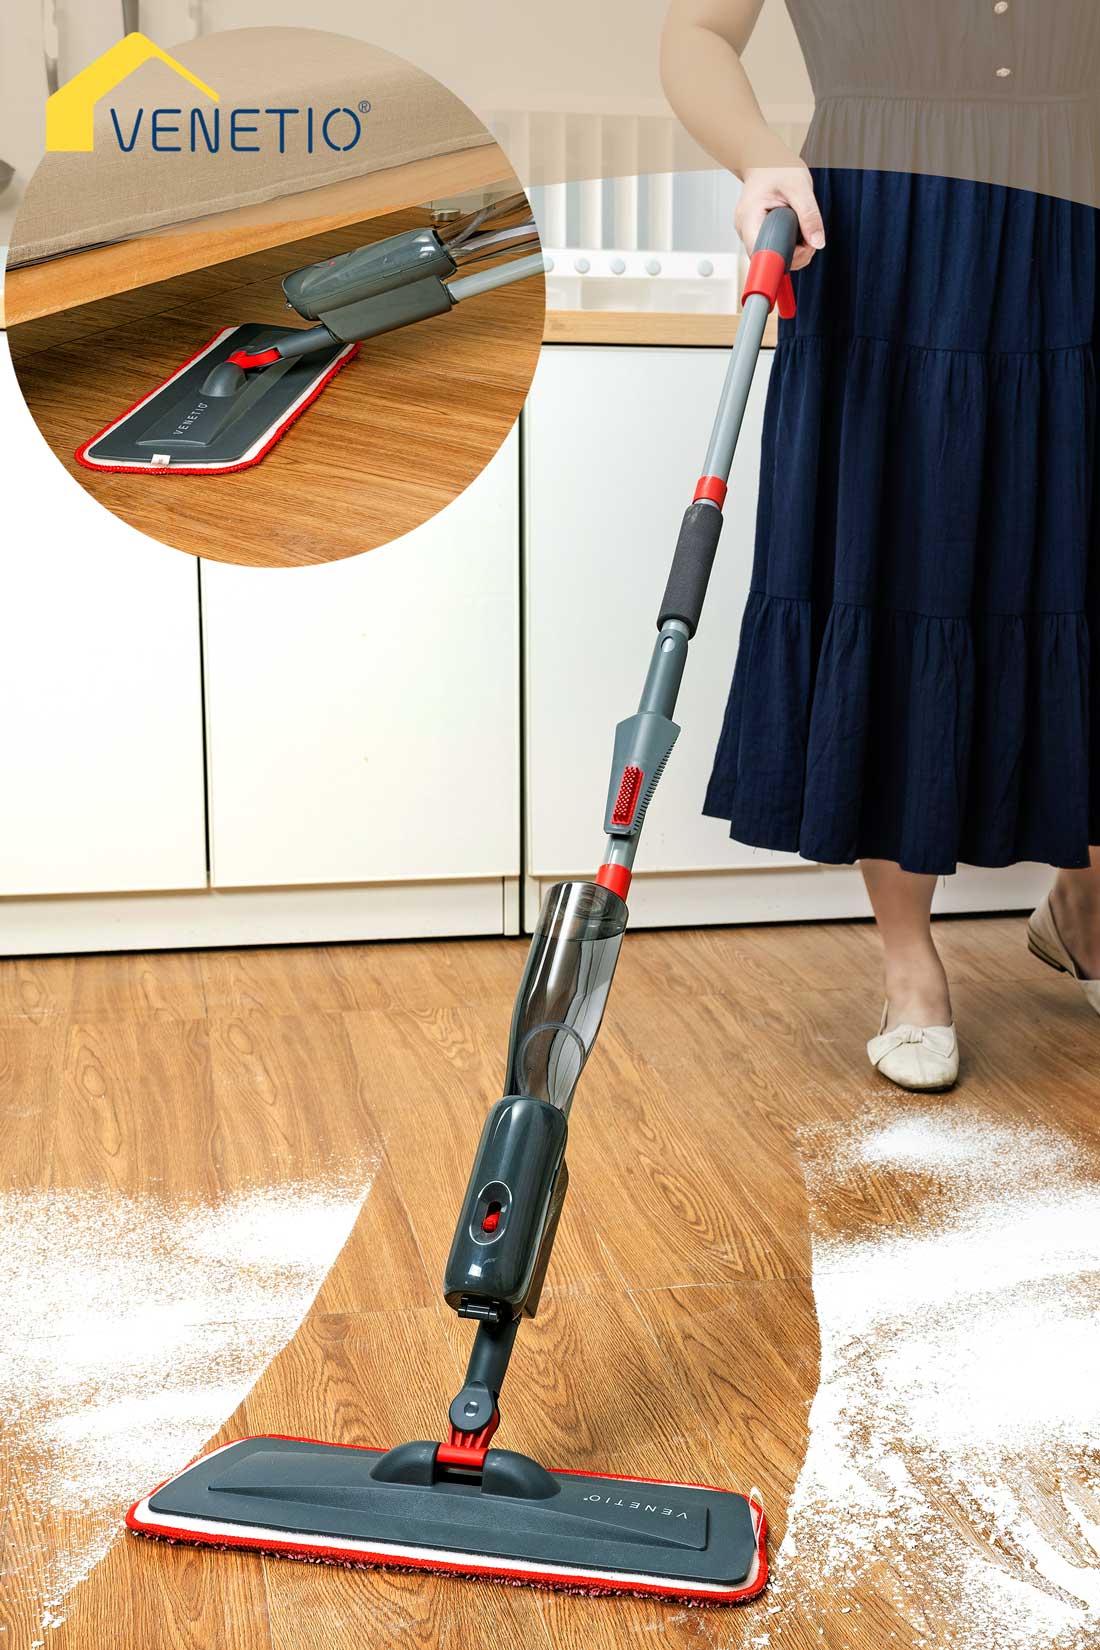 VENETIO Premium Microfiber Spray Mop for Floor Cleaning with Washable Pads and Refillable Sprayer